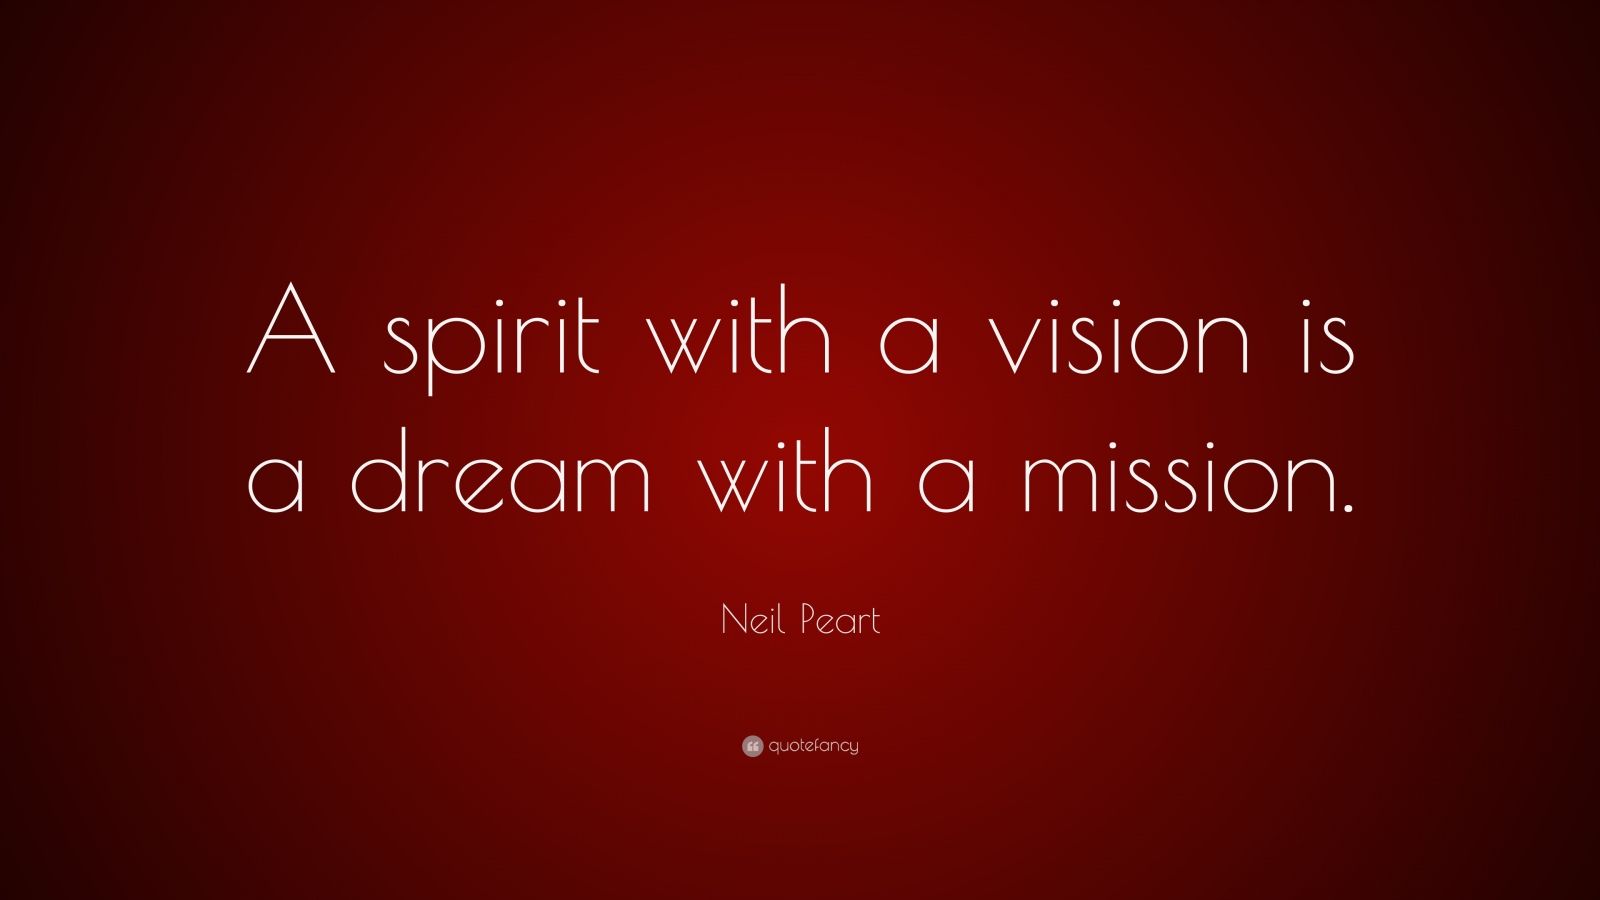 Top 100 Neil Peart Quotes (2021 Update) - Quotefancy